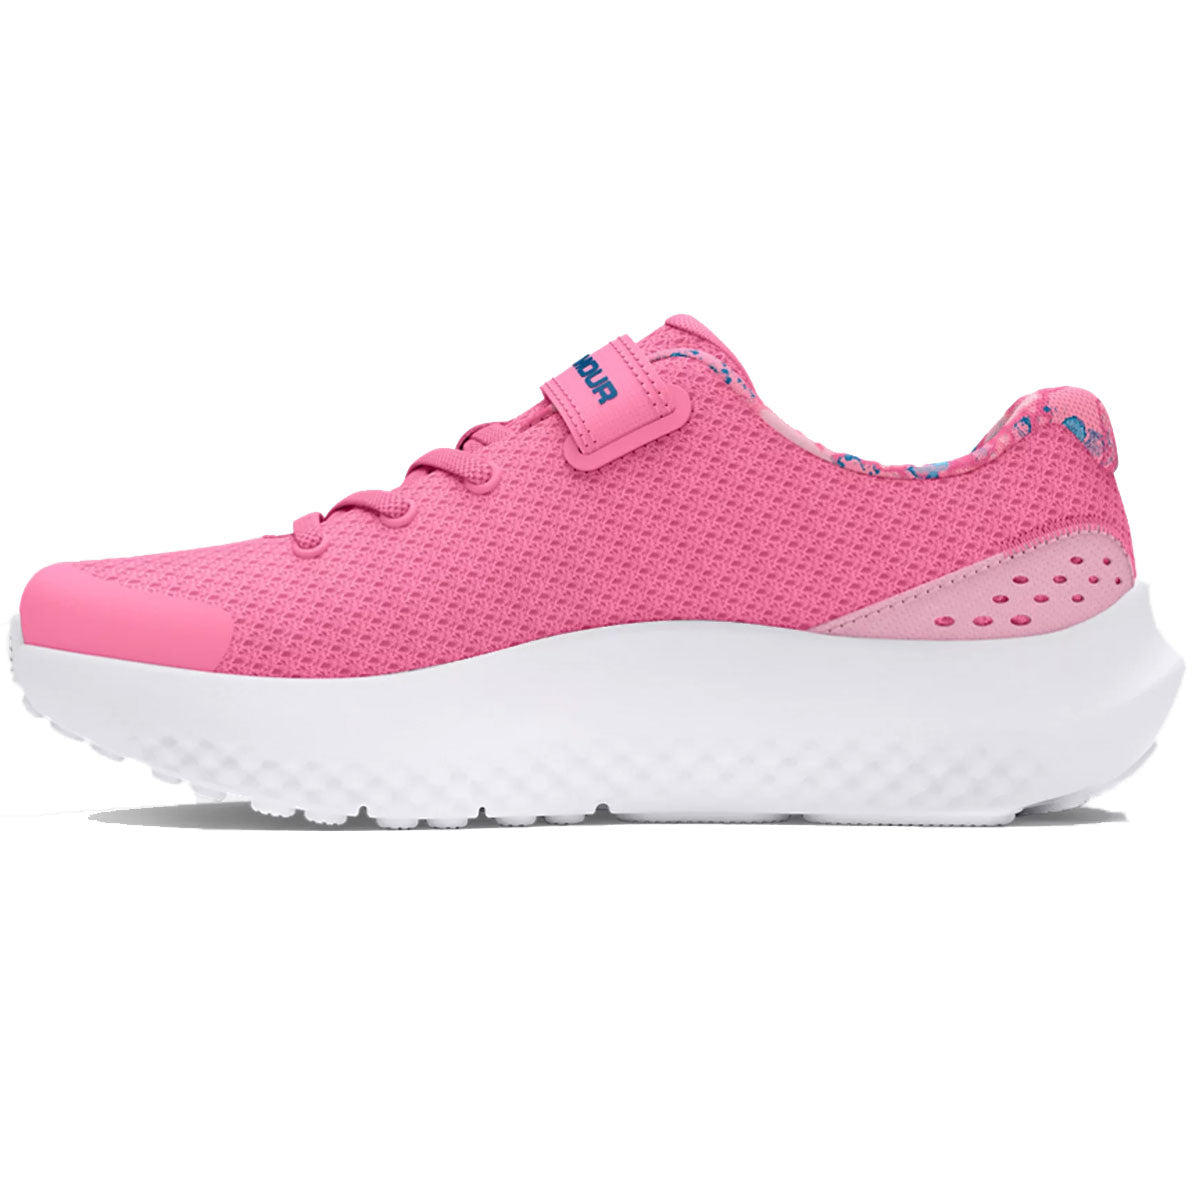 Under Armour GGS Surge 4 AC Print Trainers - Girls - Sunset Pink/Pink/Metallic Silver